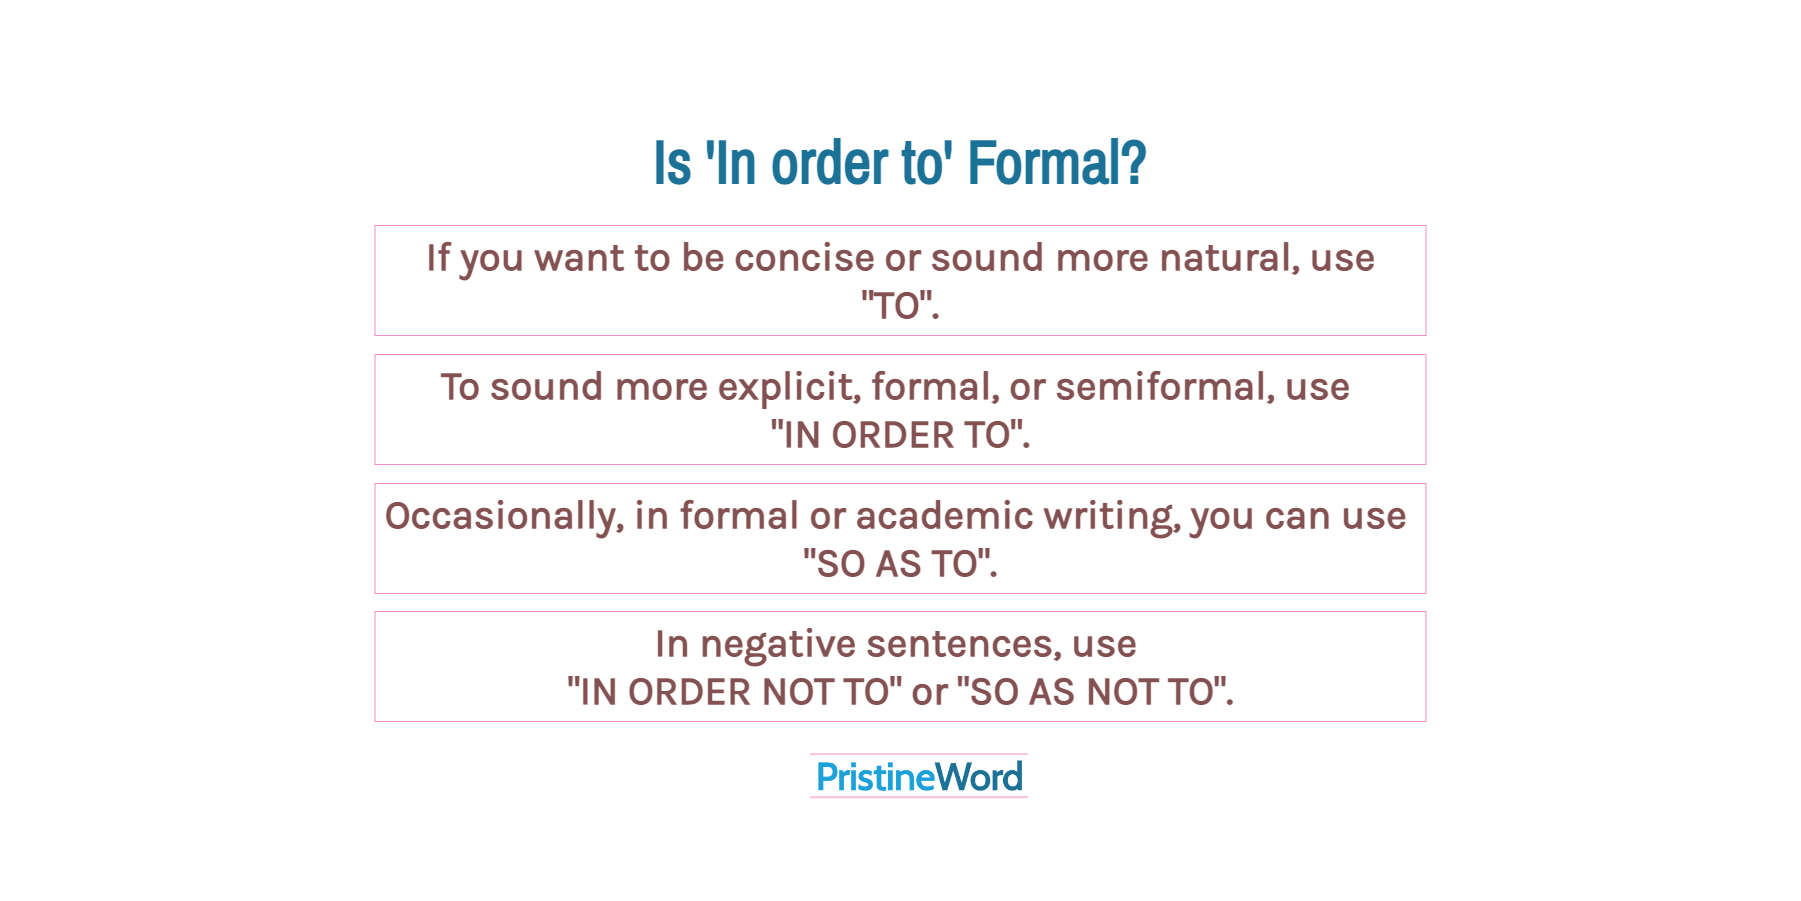 Is 'In order to' Formal?